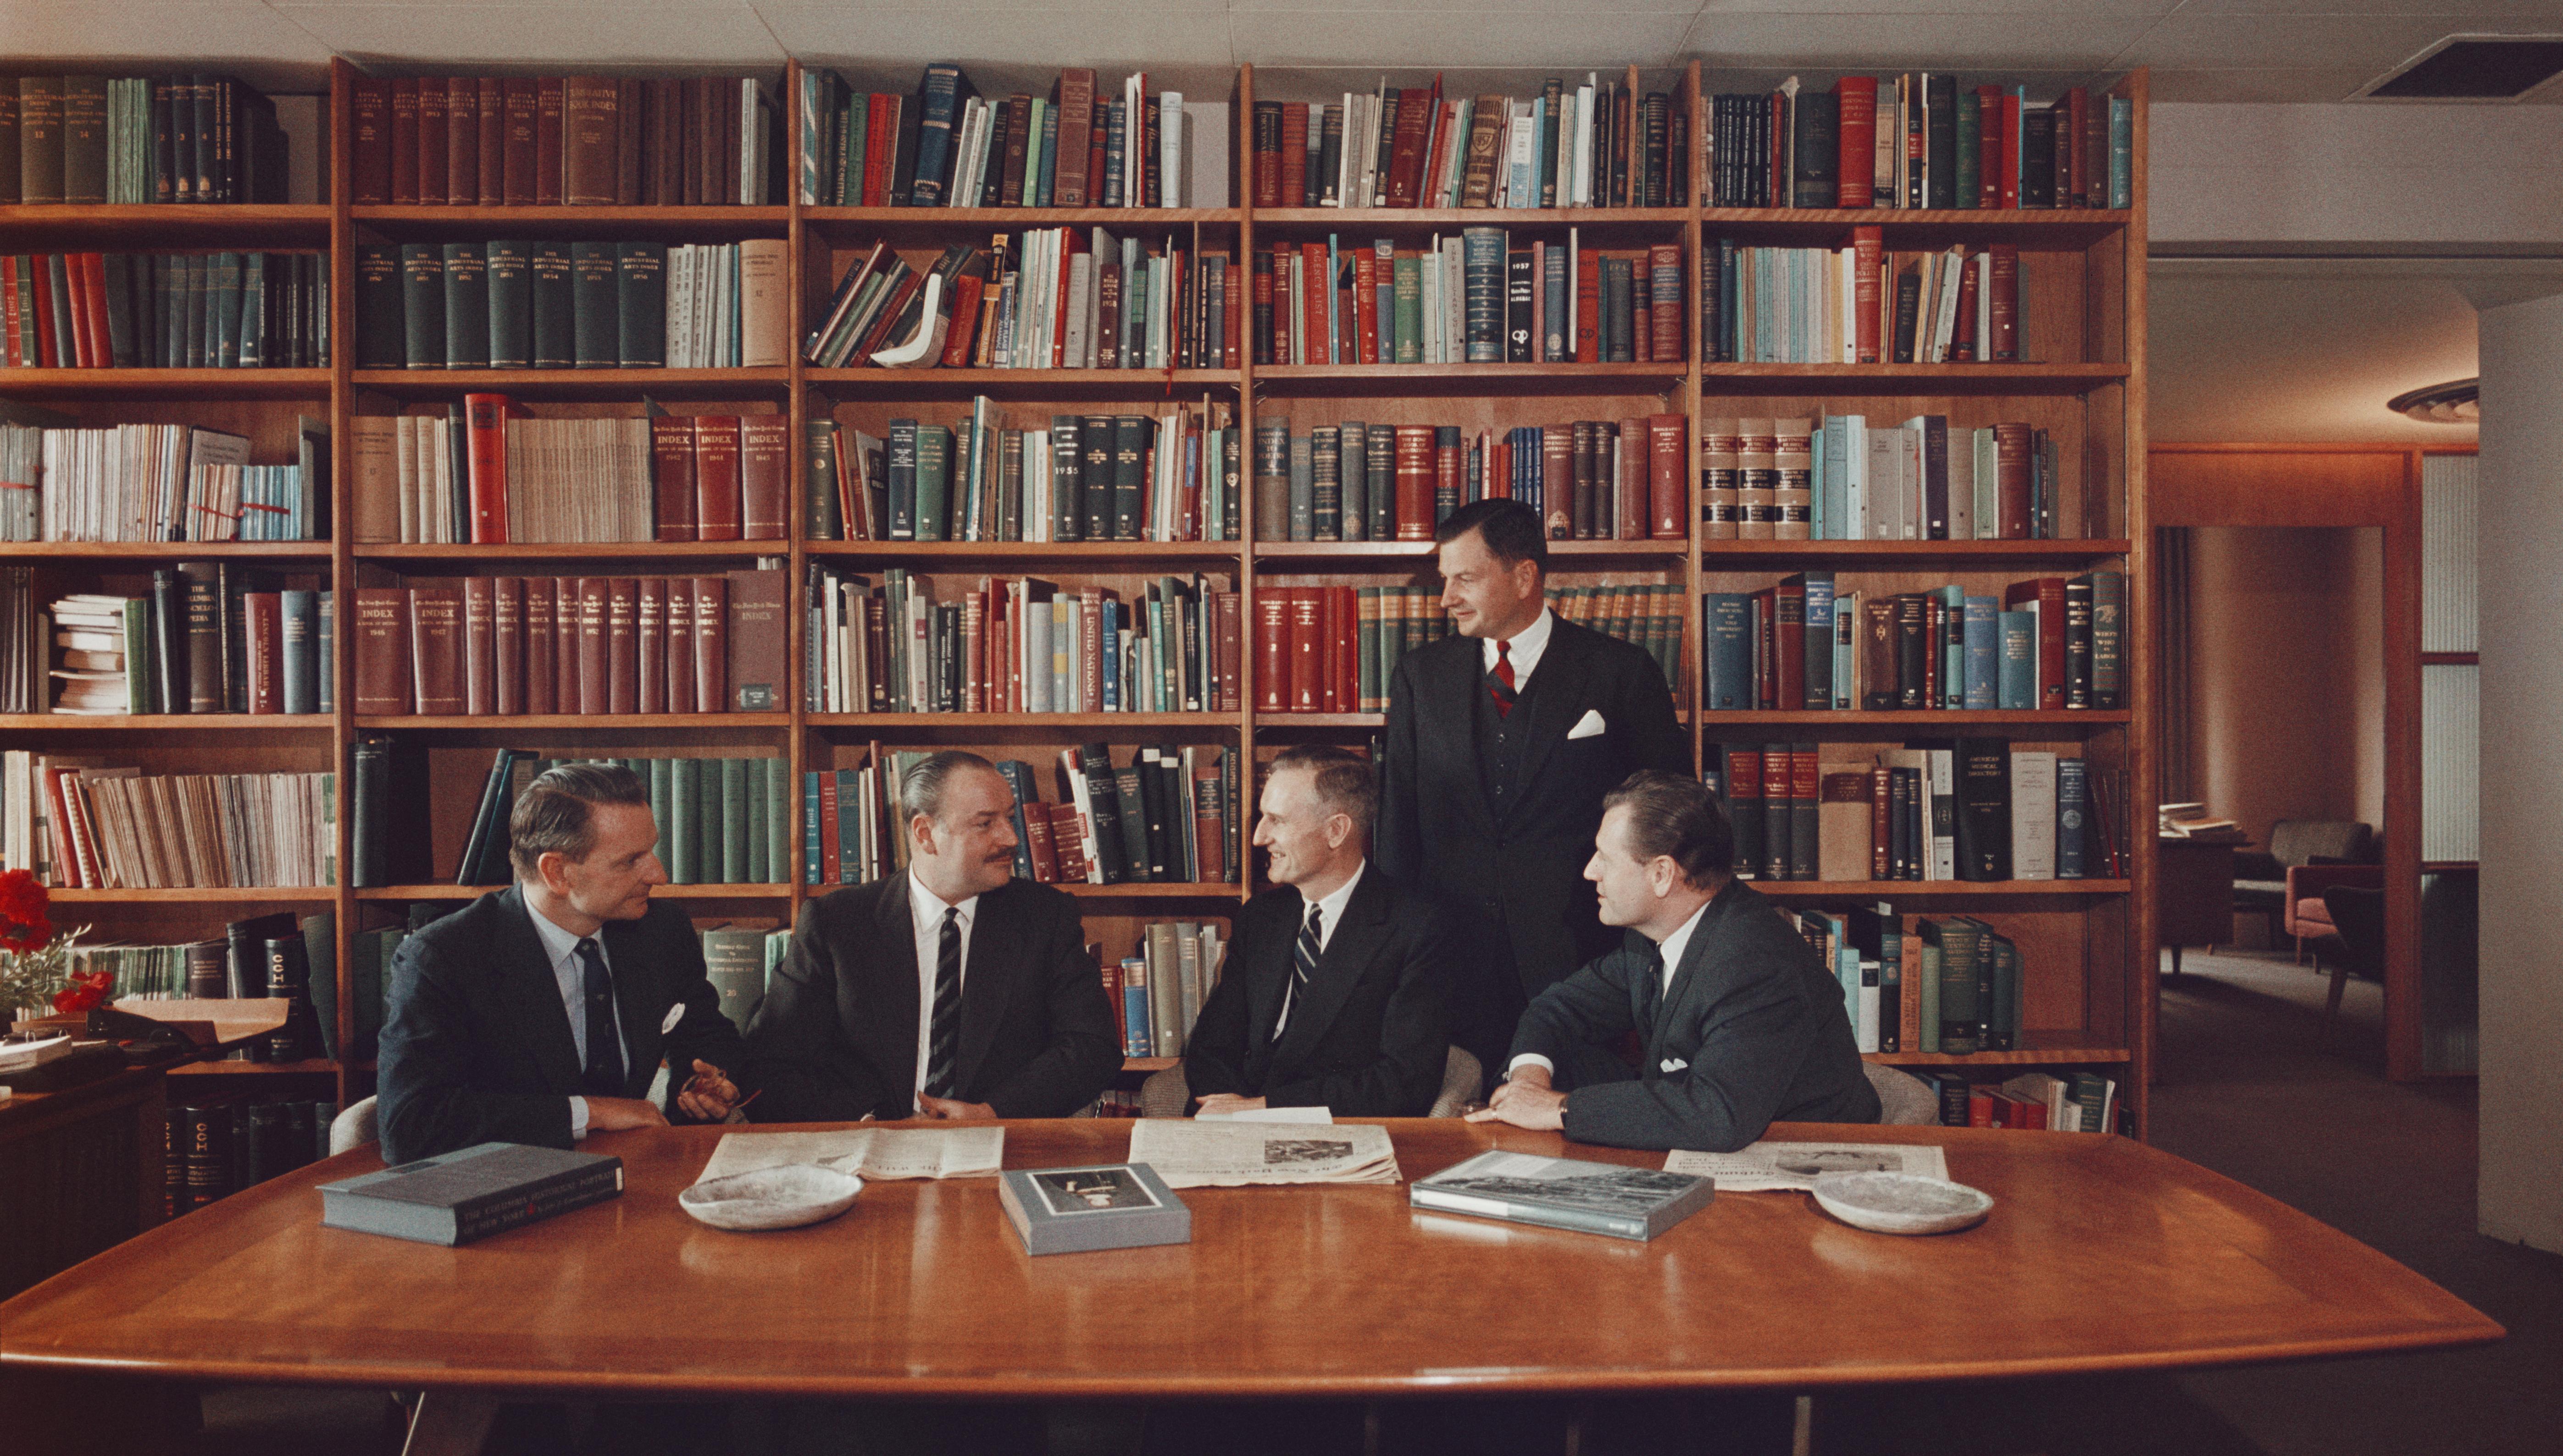 1960: The Rockefeller brothers in their Radio City, New York office. Left to right, Laurance (1910 - 2004), Winthrop (1912 - 1973), John D. Rockefeller (1906 - 1978), David, and Nelson (1908 - 1979).

Slim Aarons
Rockefeller Brothers
Slim Aarons